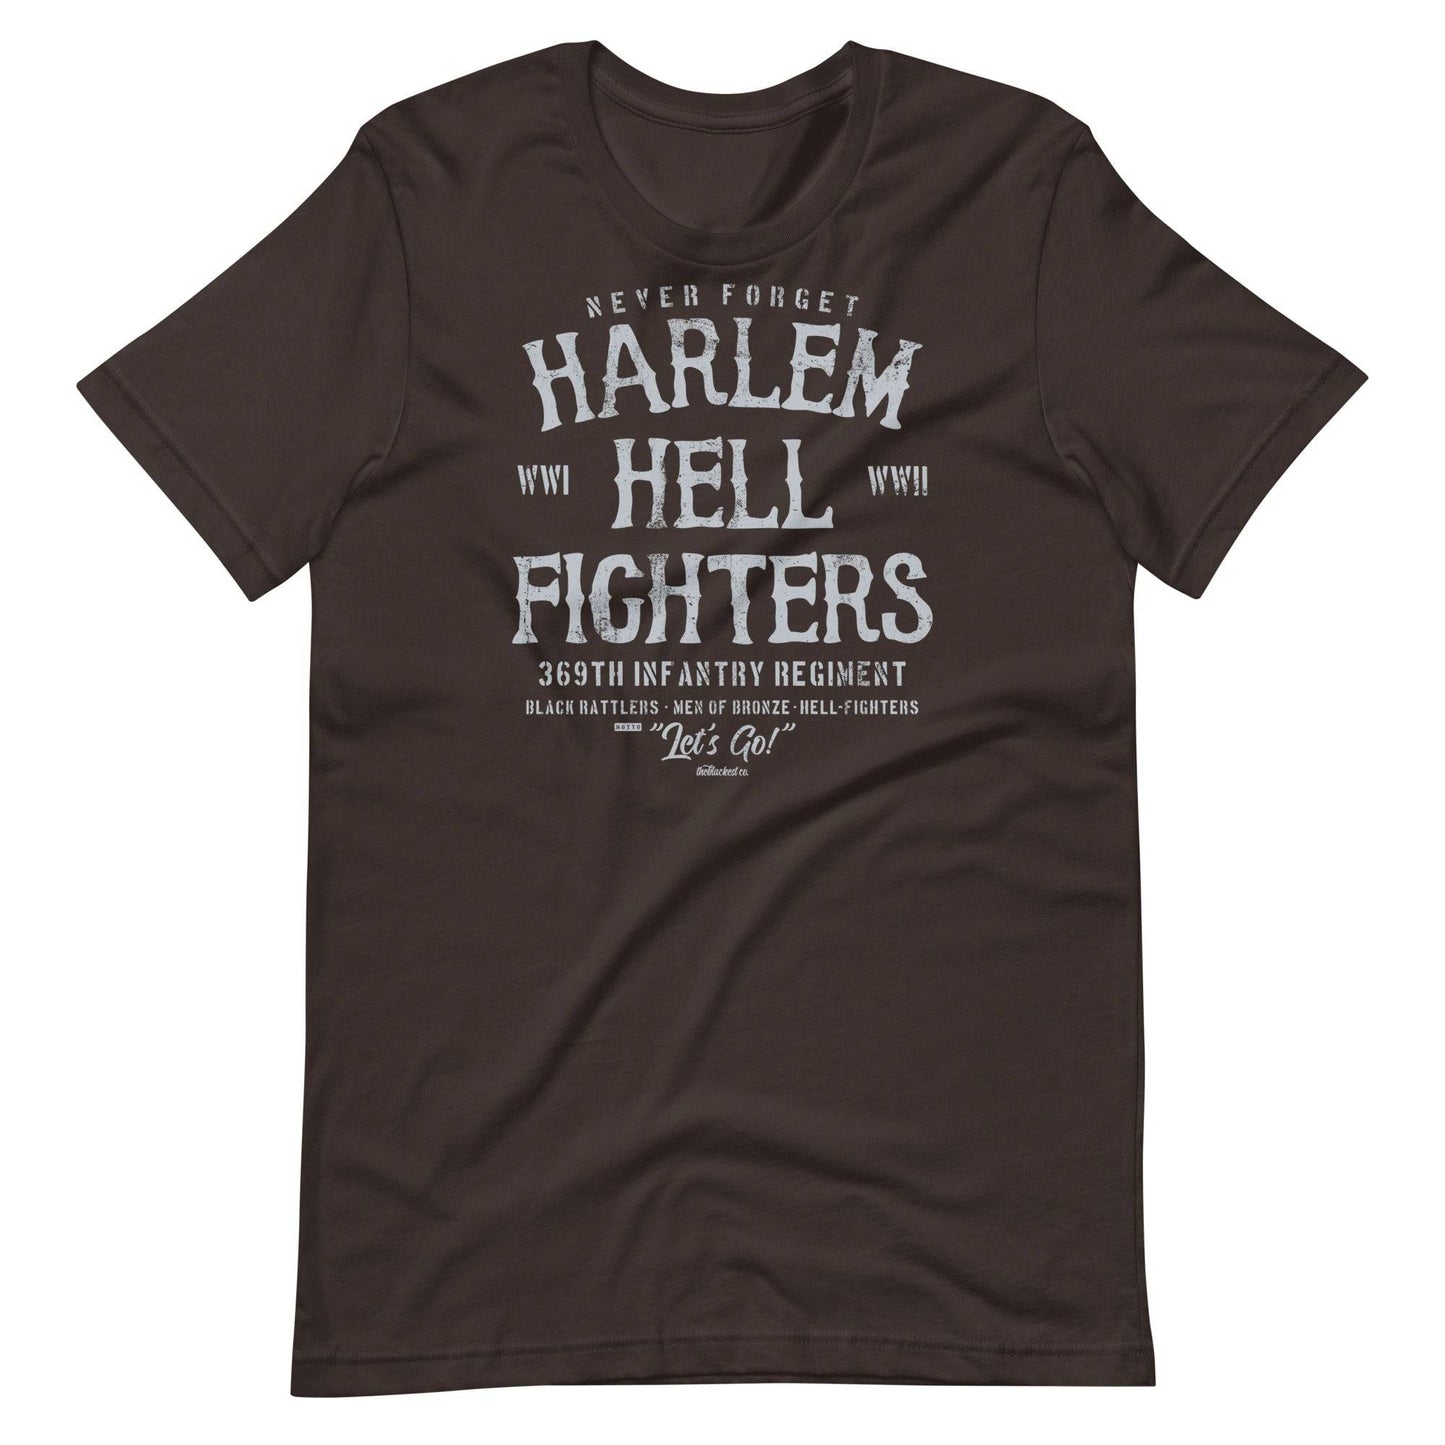 navy t shirt with white text that reads harlem hellfighters wwi and wwii